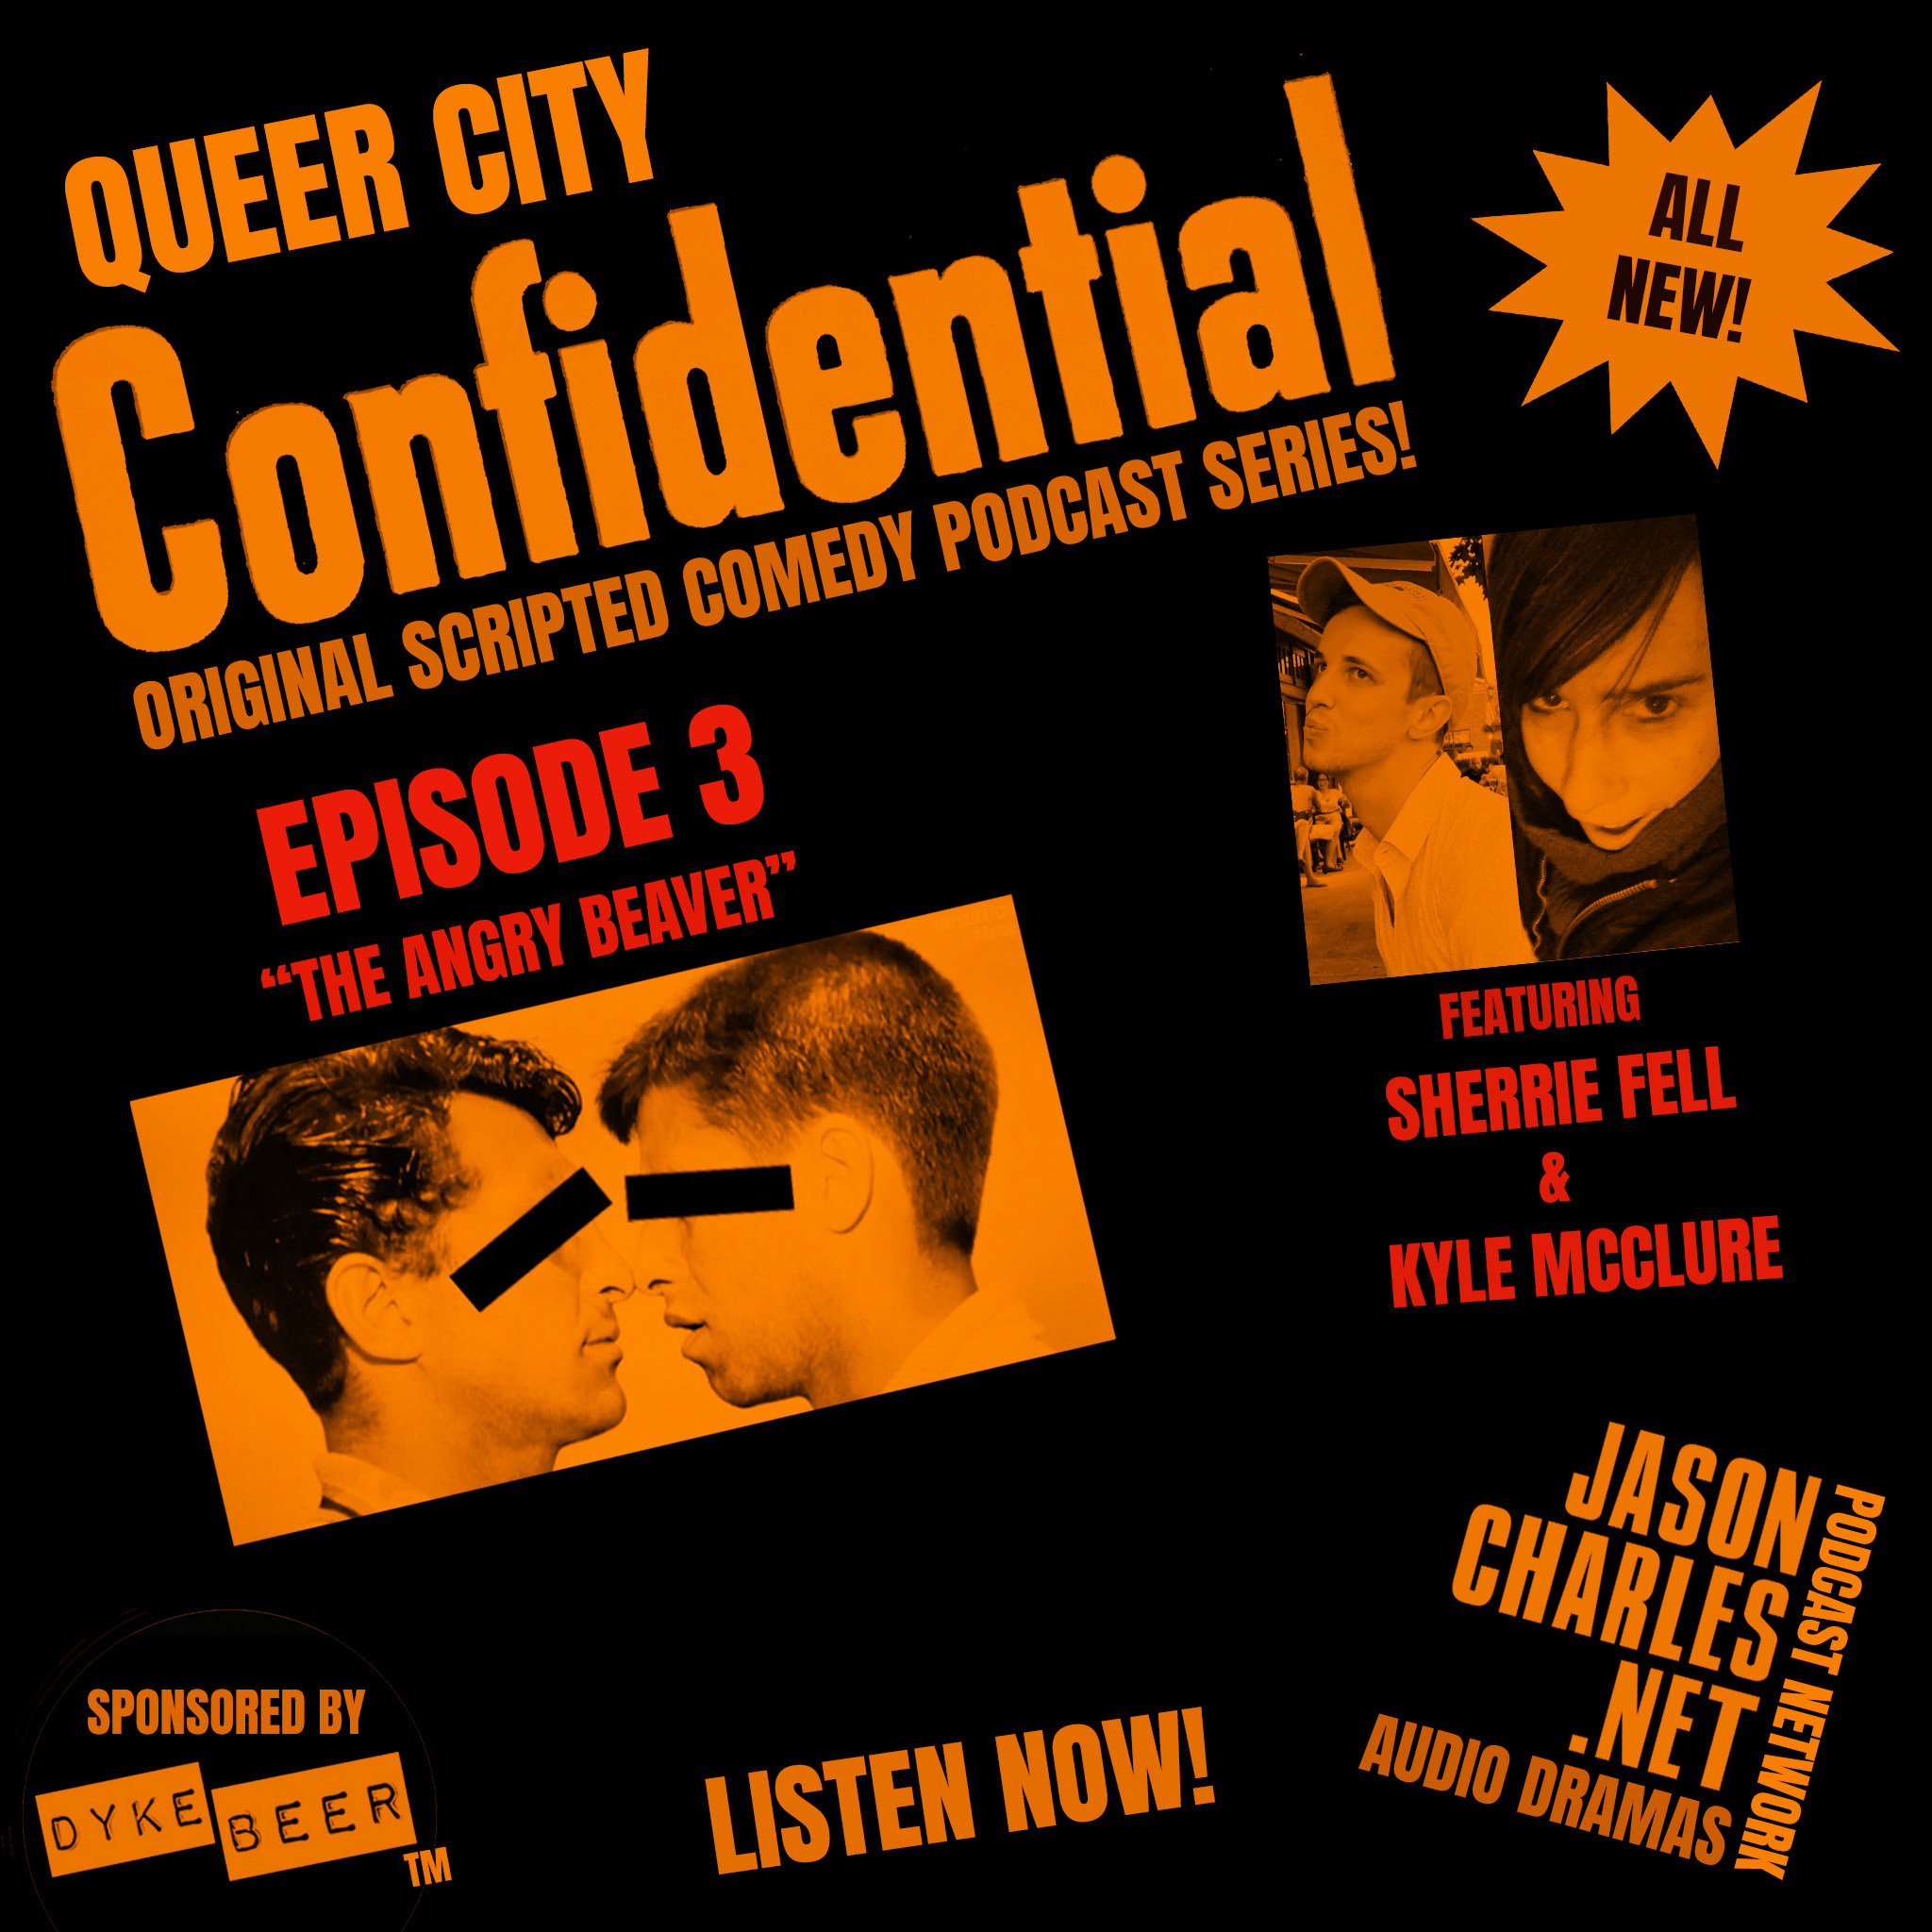 QUEER CITY CONFIDENTIAL Episode 3 The Angry Beaver